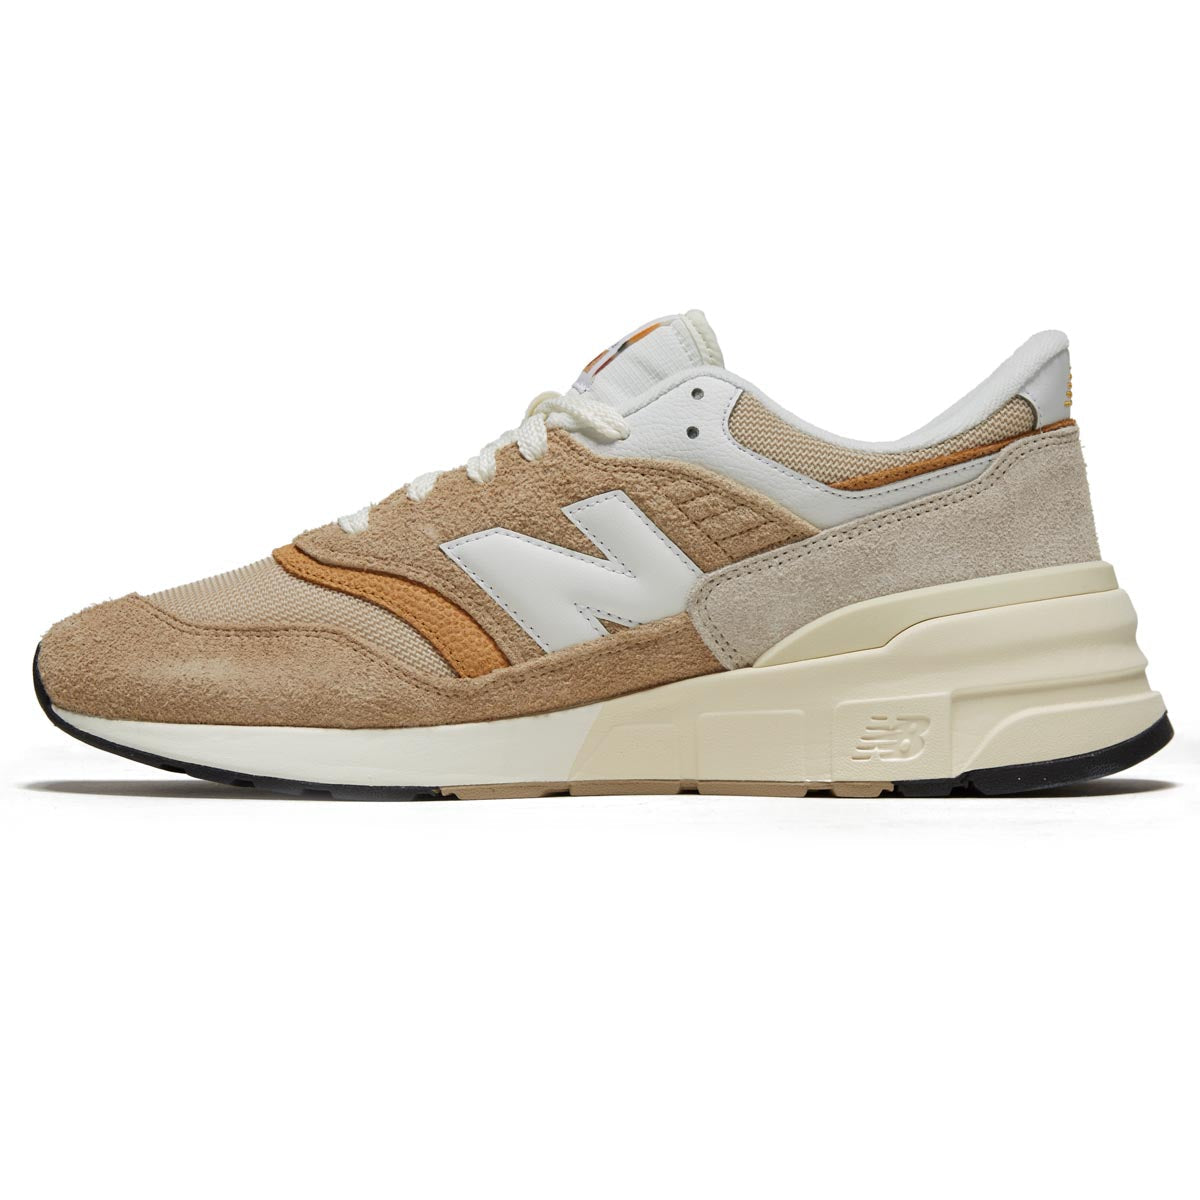 New Balance 997R Shoes - Dolce image 2